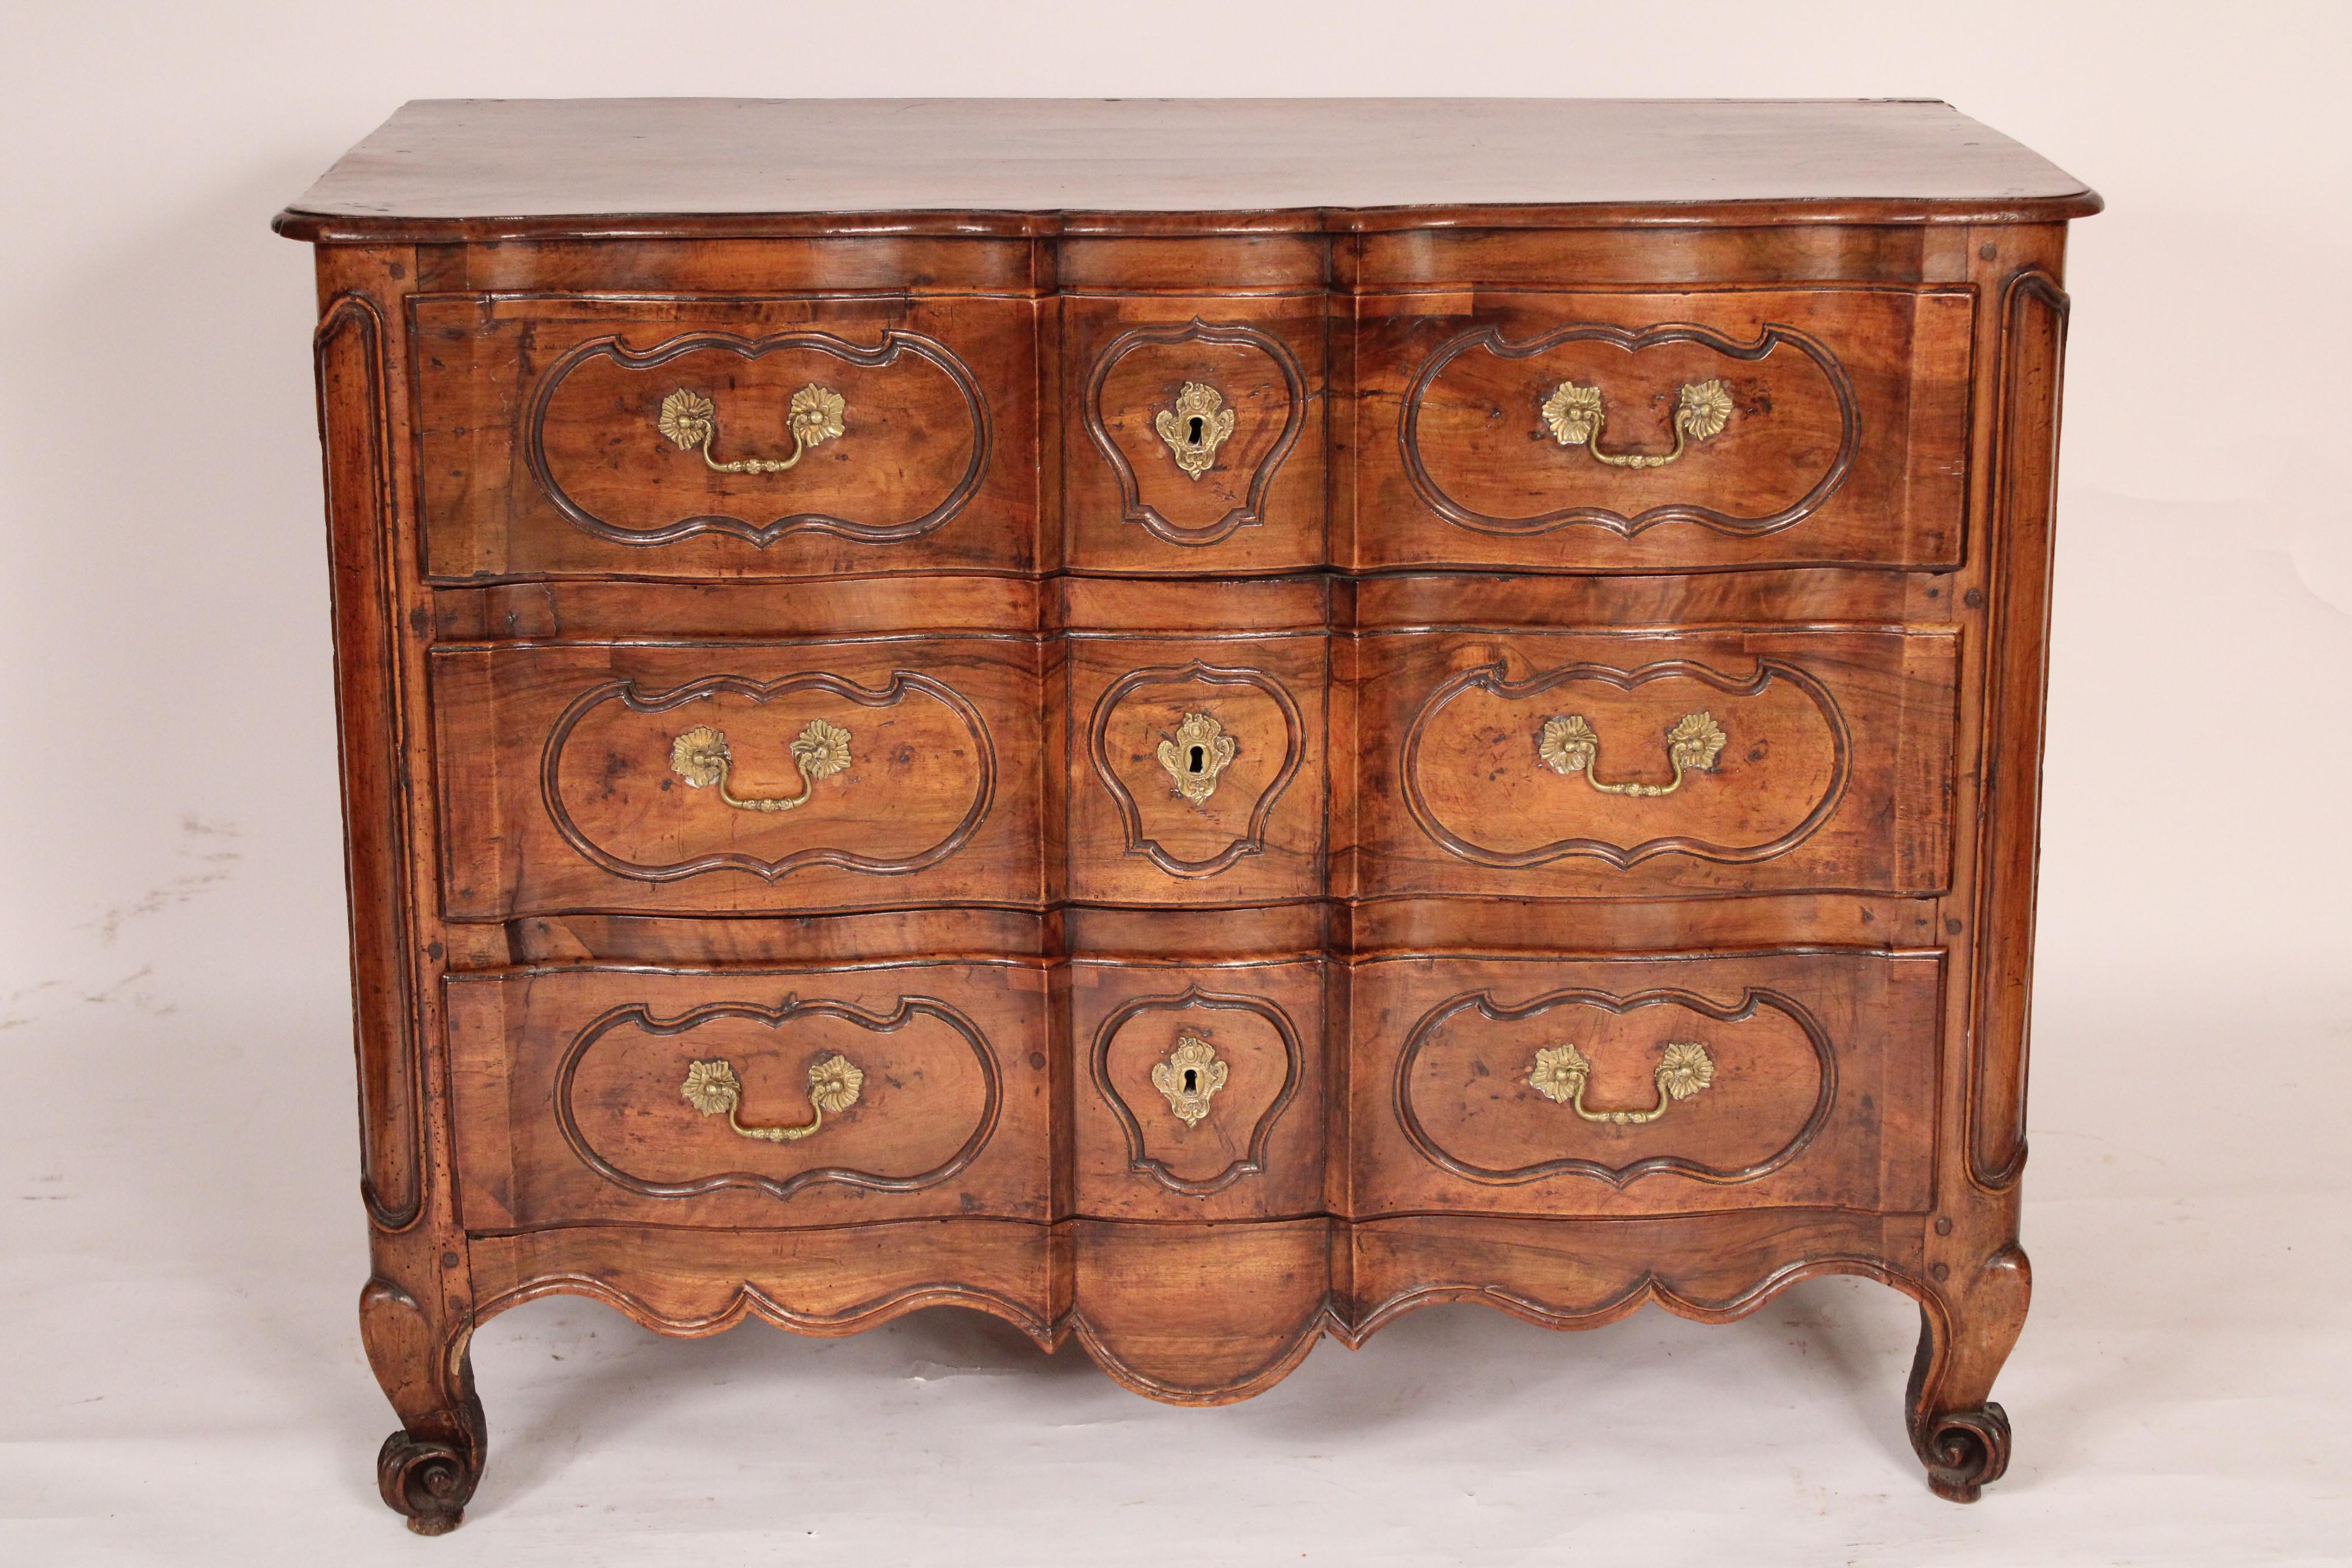 Louis XV provincial walnut 3 drawer chest of drawers, early 19th century. With an overhanging single board top with molded front and side edges, below 3 arbalete shaped drawers with brass pulls and escutcheons, a scalloped apron, resting on French